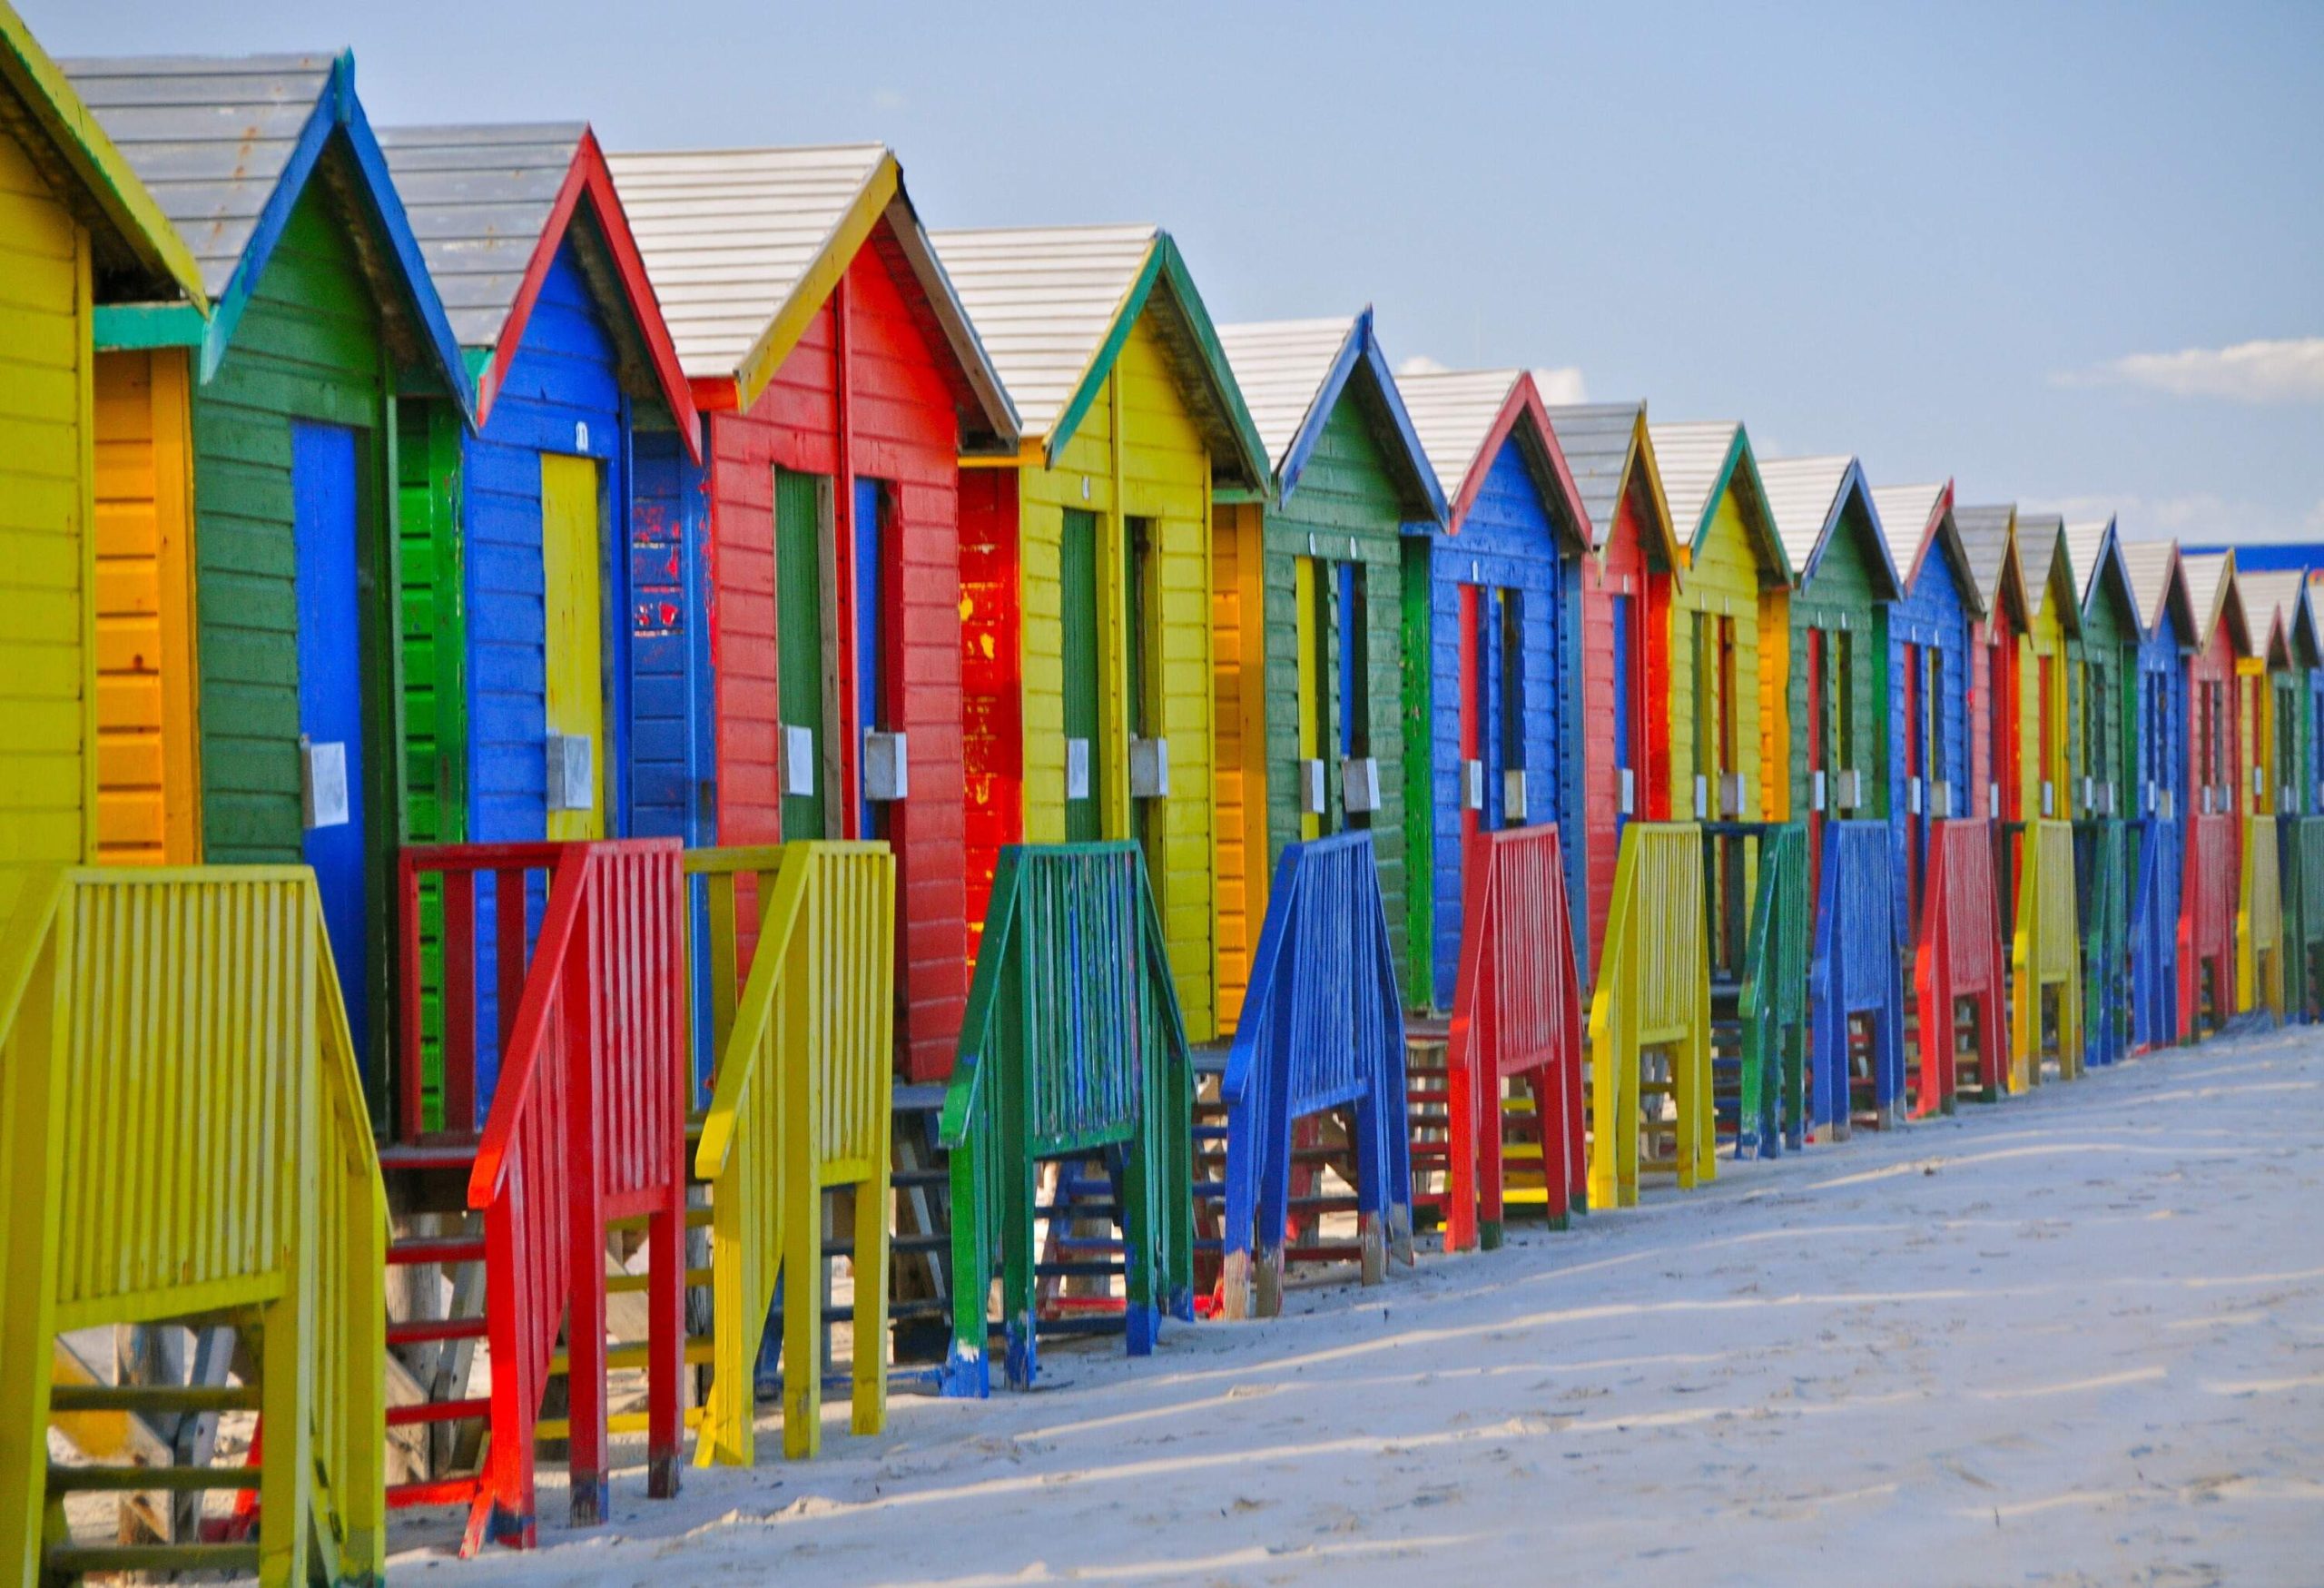 A series of rainbow-coloured beach huts lining up across the sand.